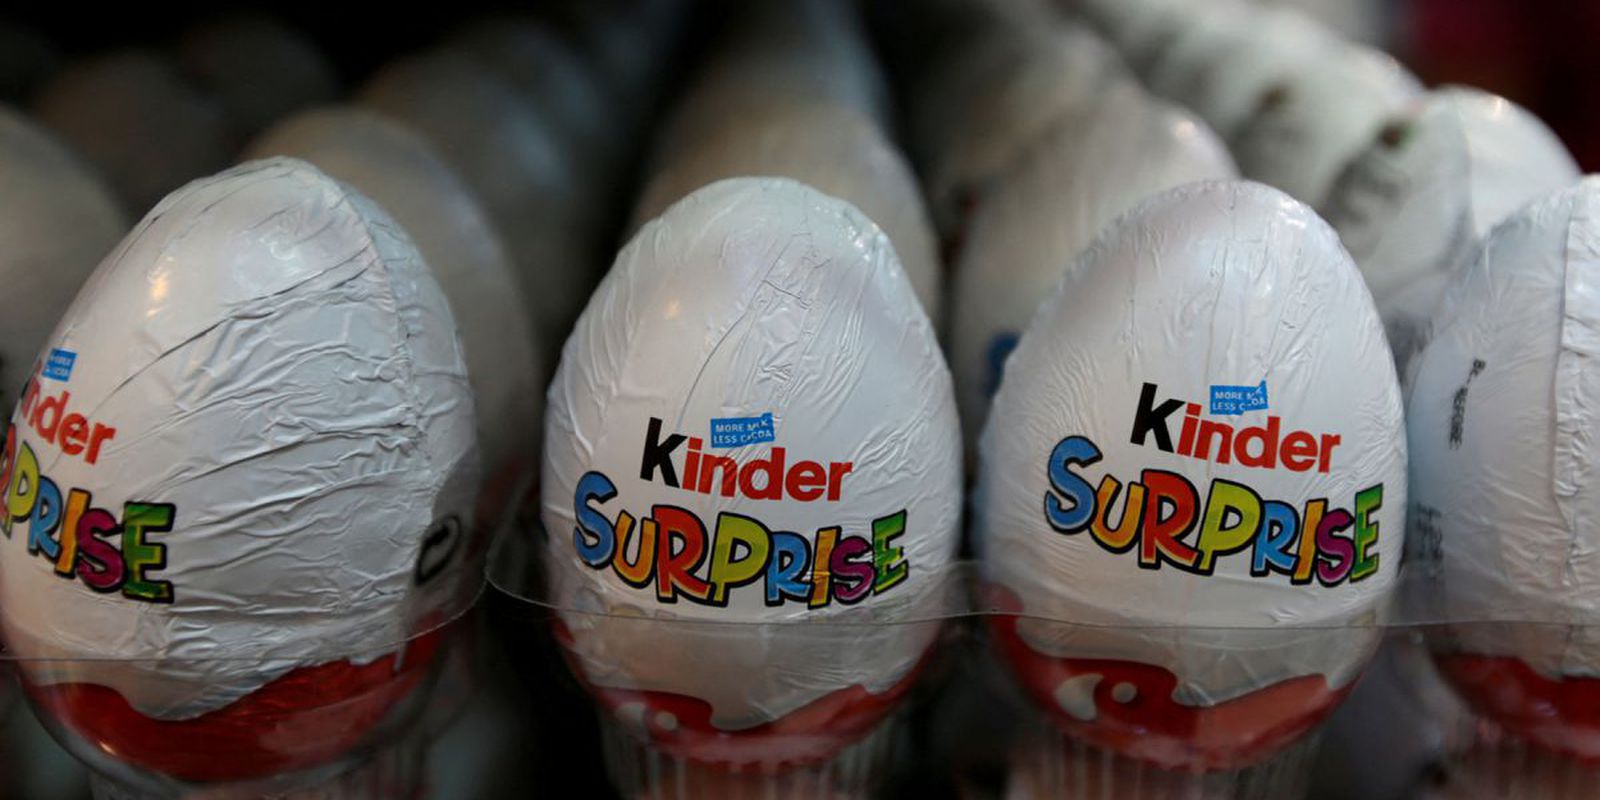 Anvisa bans import and sale of Kinder chocolates in Brazil